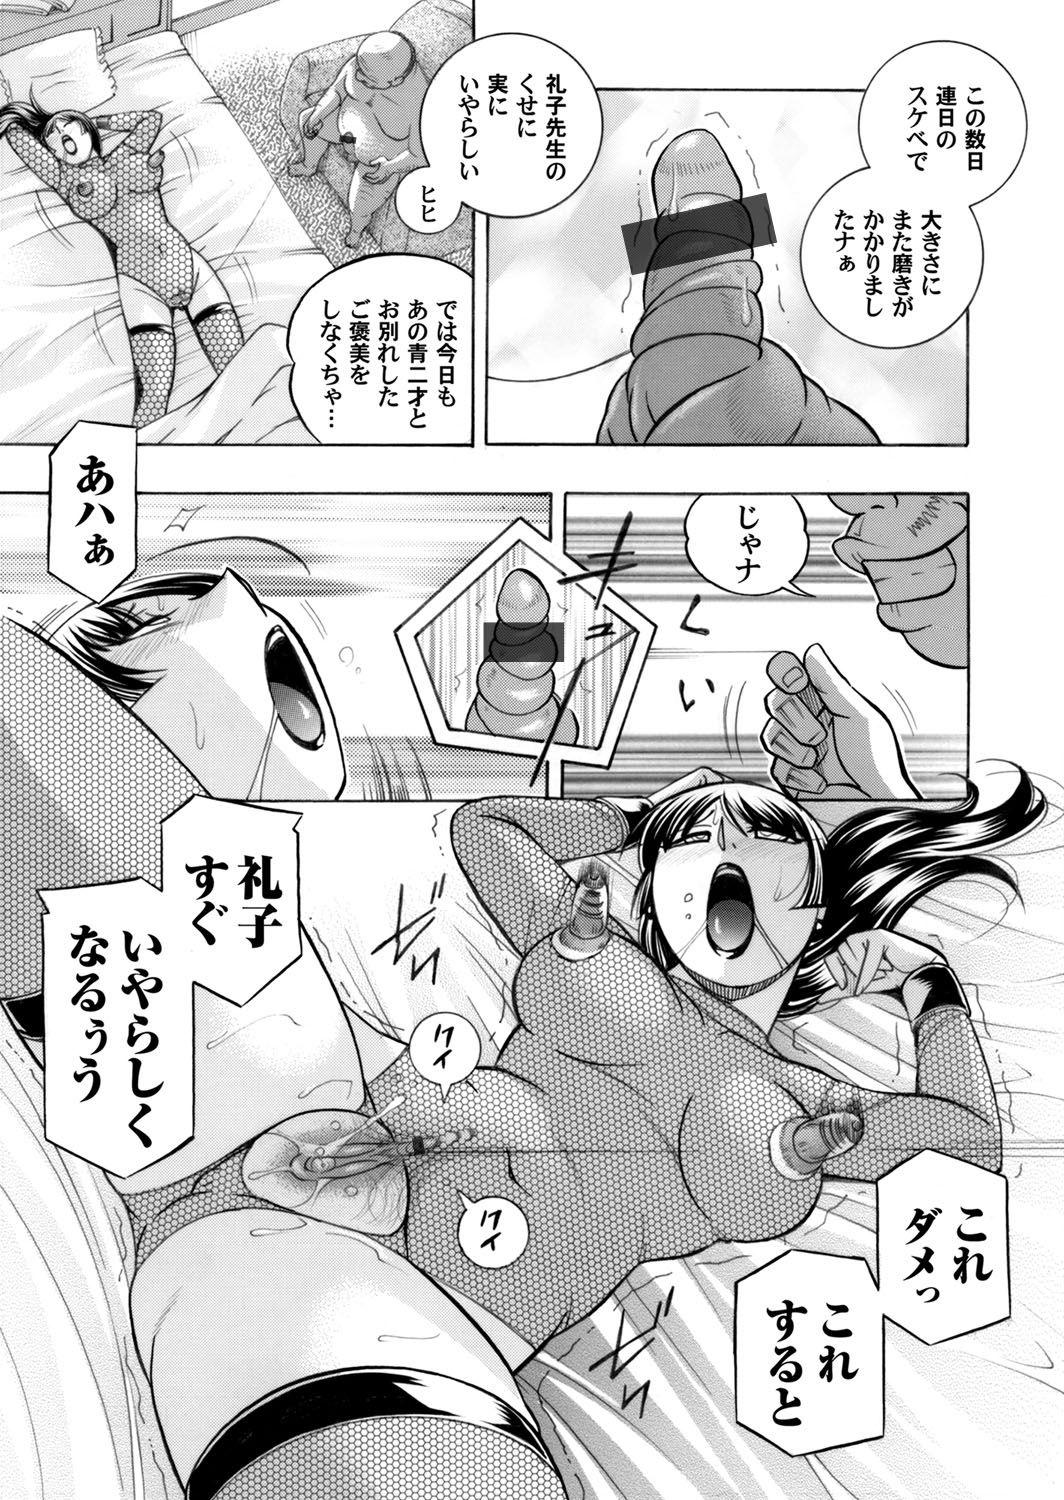 Screaming COMIC Magnum Vol. 85 Sextoy - Page 6